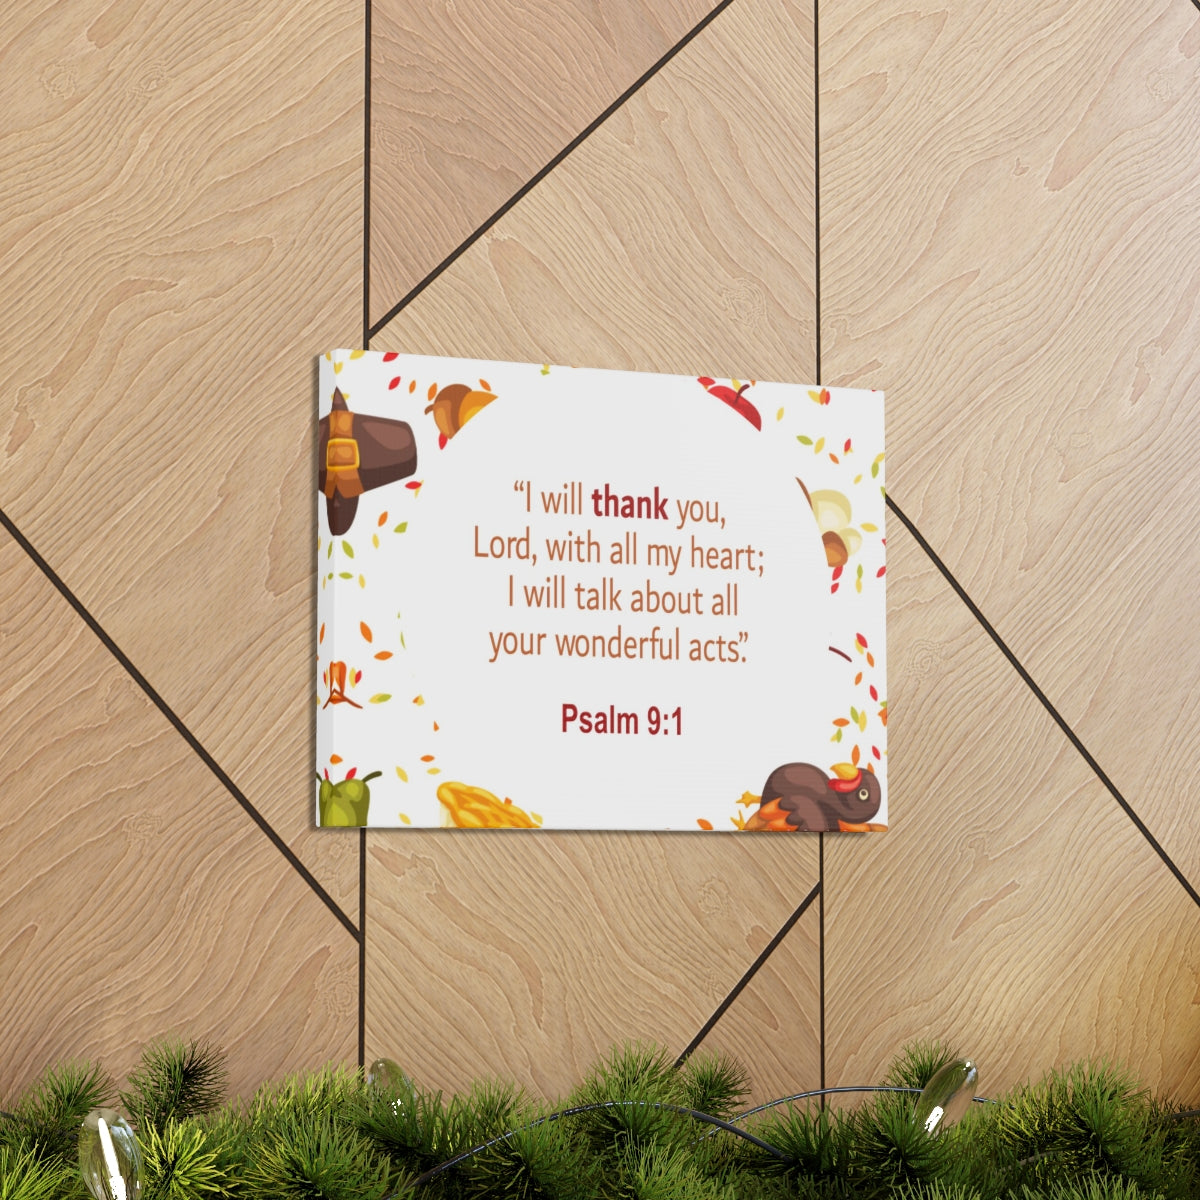 Scripture Walls With All My Heart Psalm 9:1 Bible Verse Canvas Christian Wall Art Ready to Hang Unframed-Express Your Love Gifts